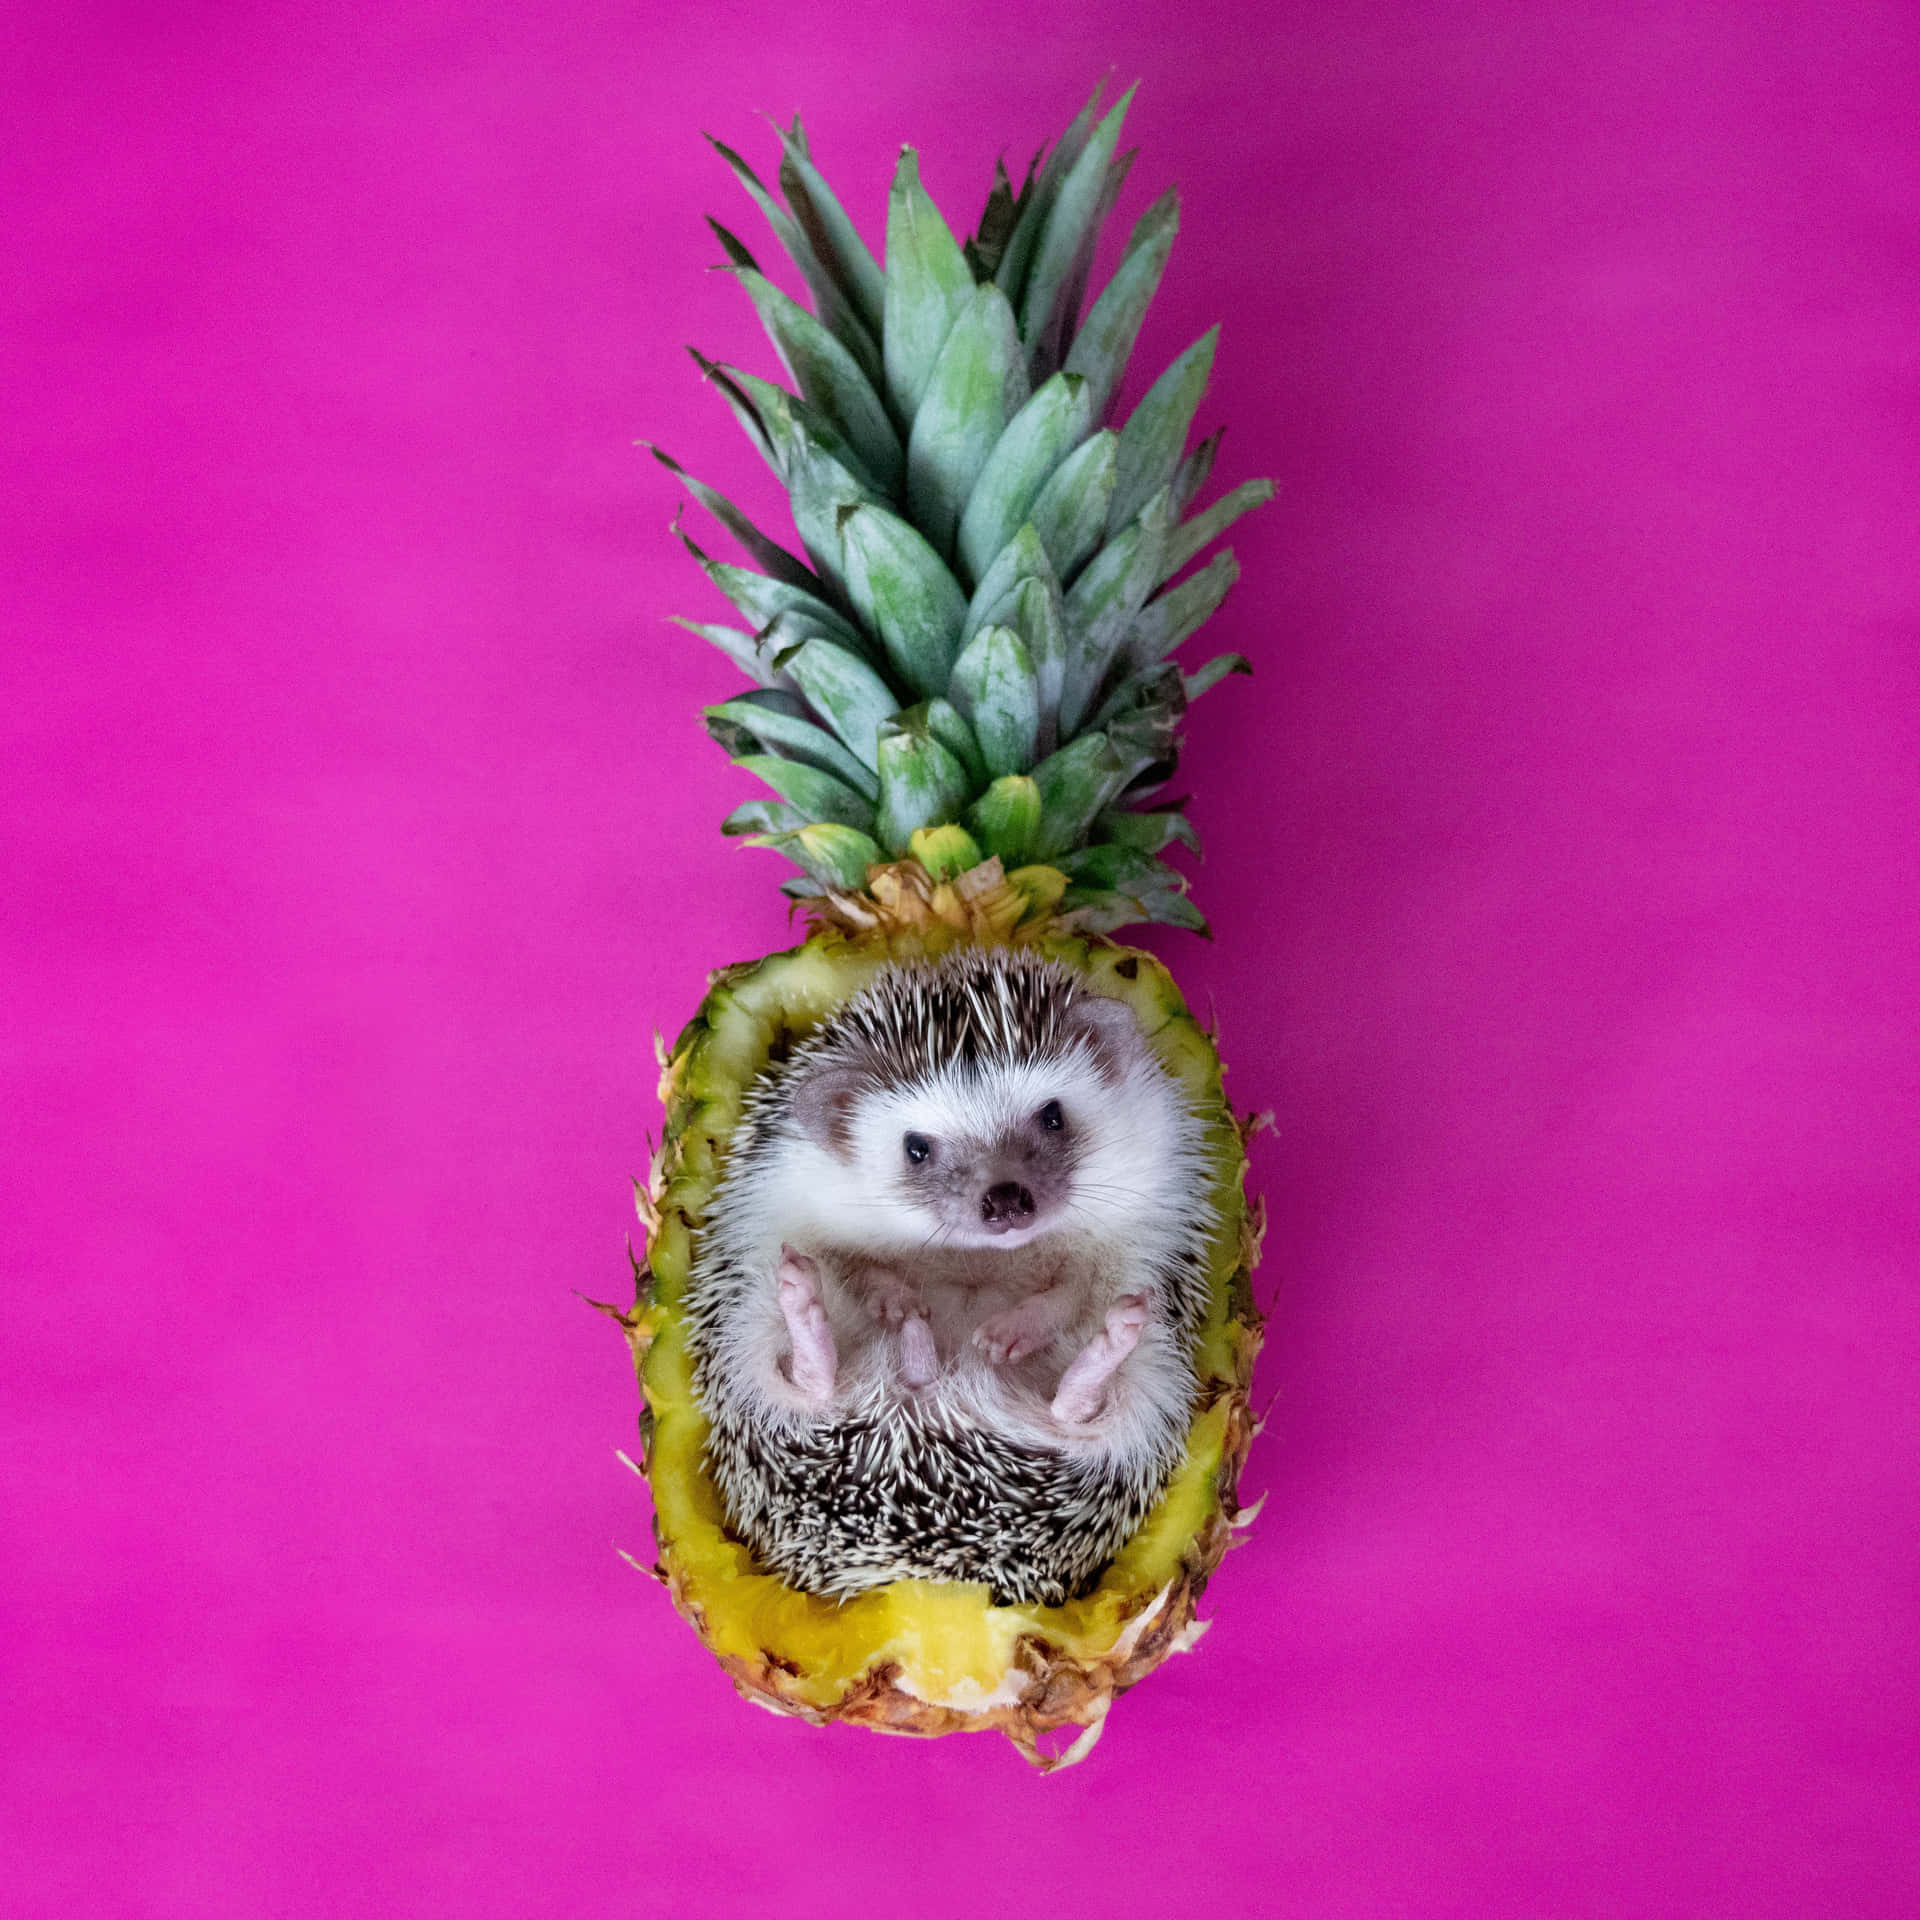 Cute Hedgehog Inside Pineapple On Pink Picture